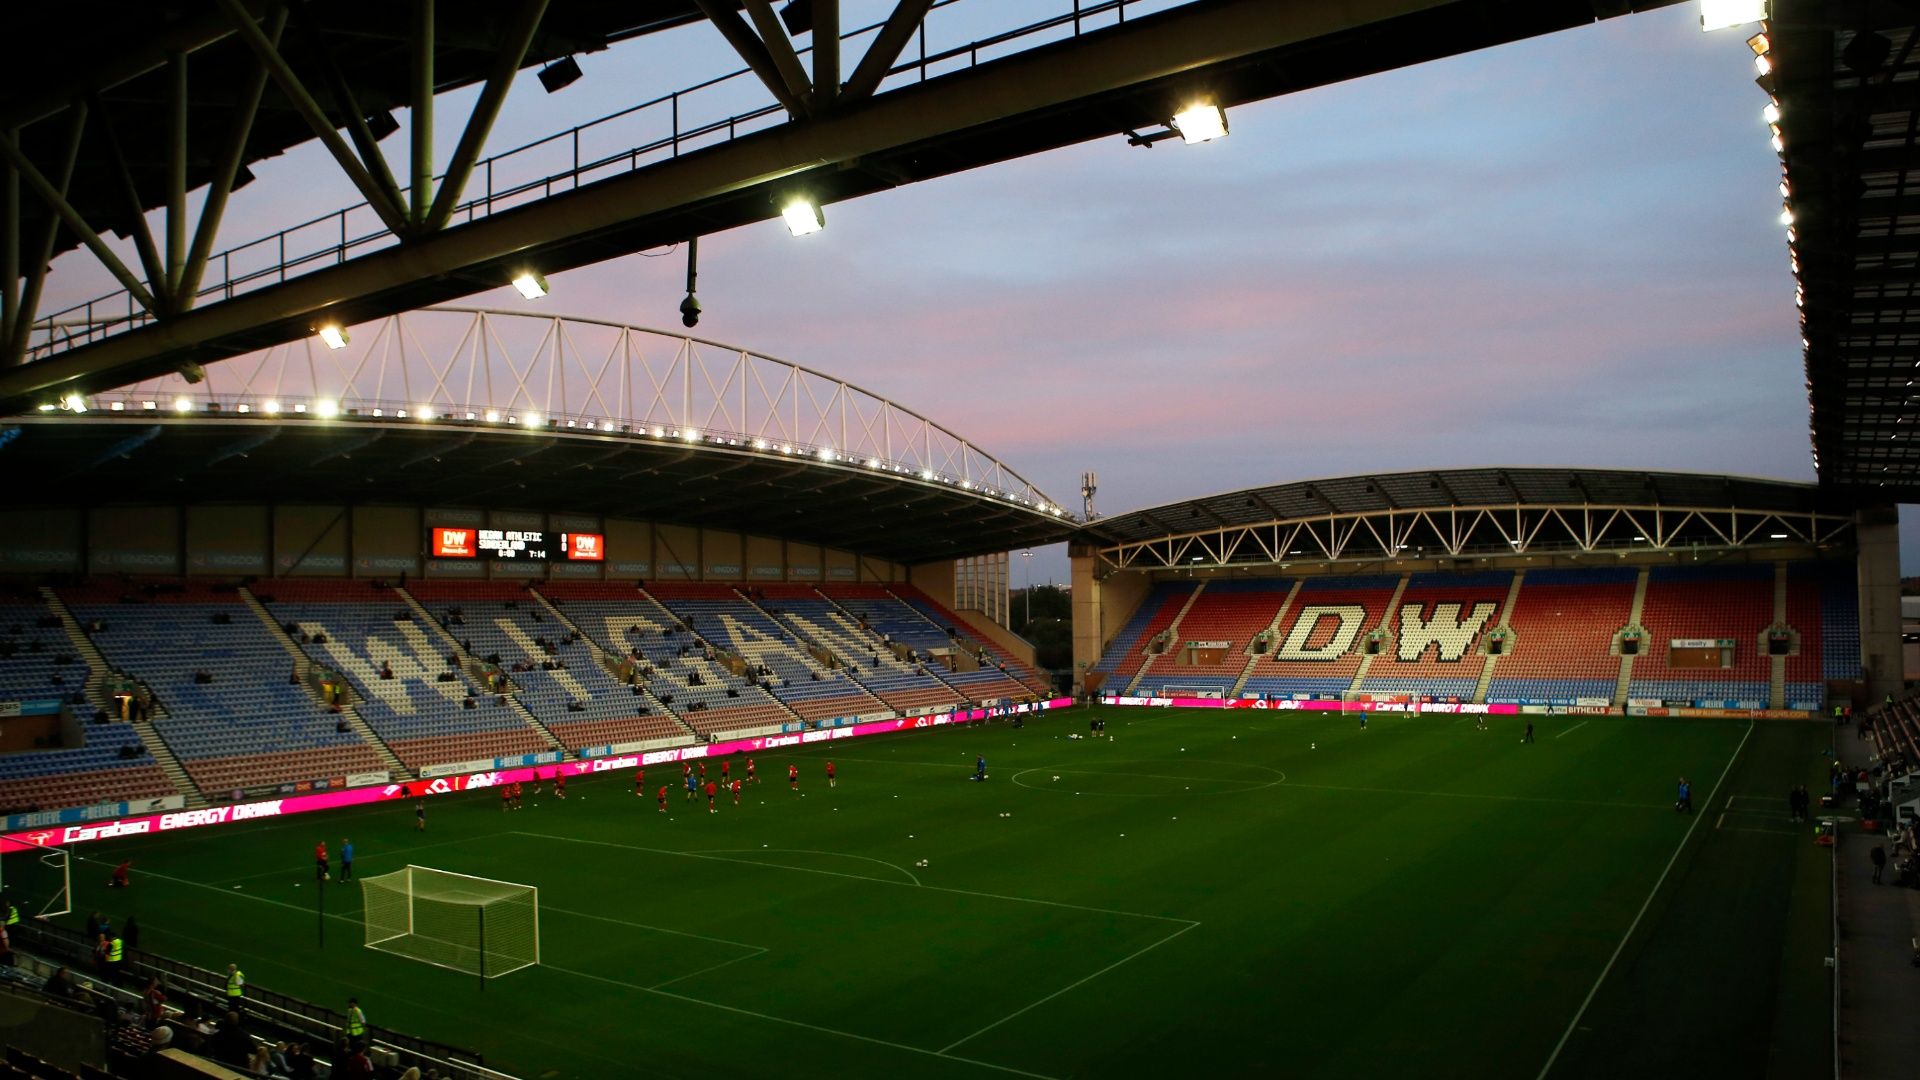 Local businessman Mike Danson in talks for Wigan Athletic takeover